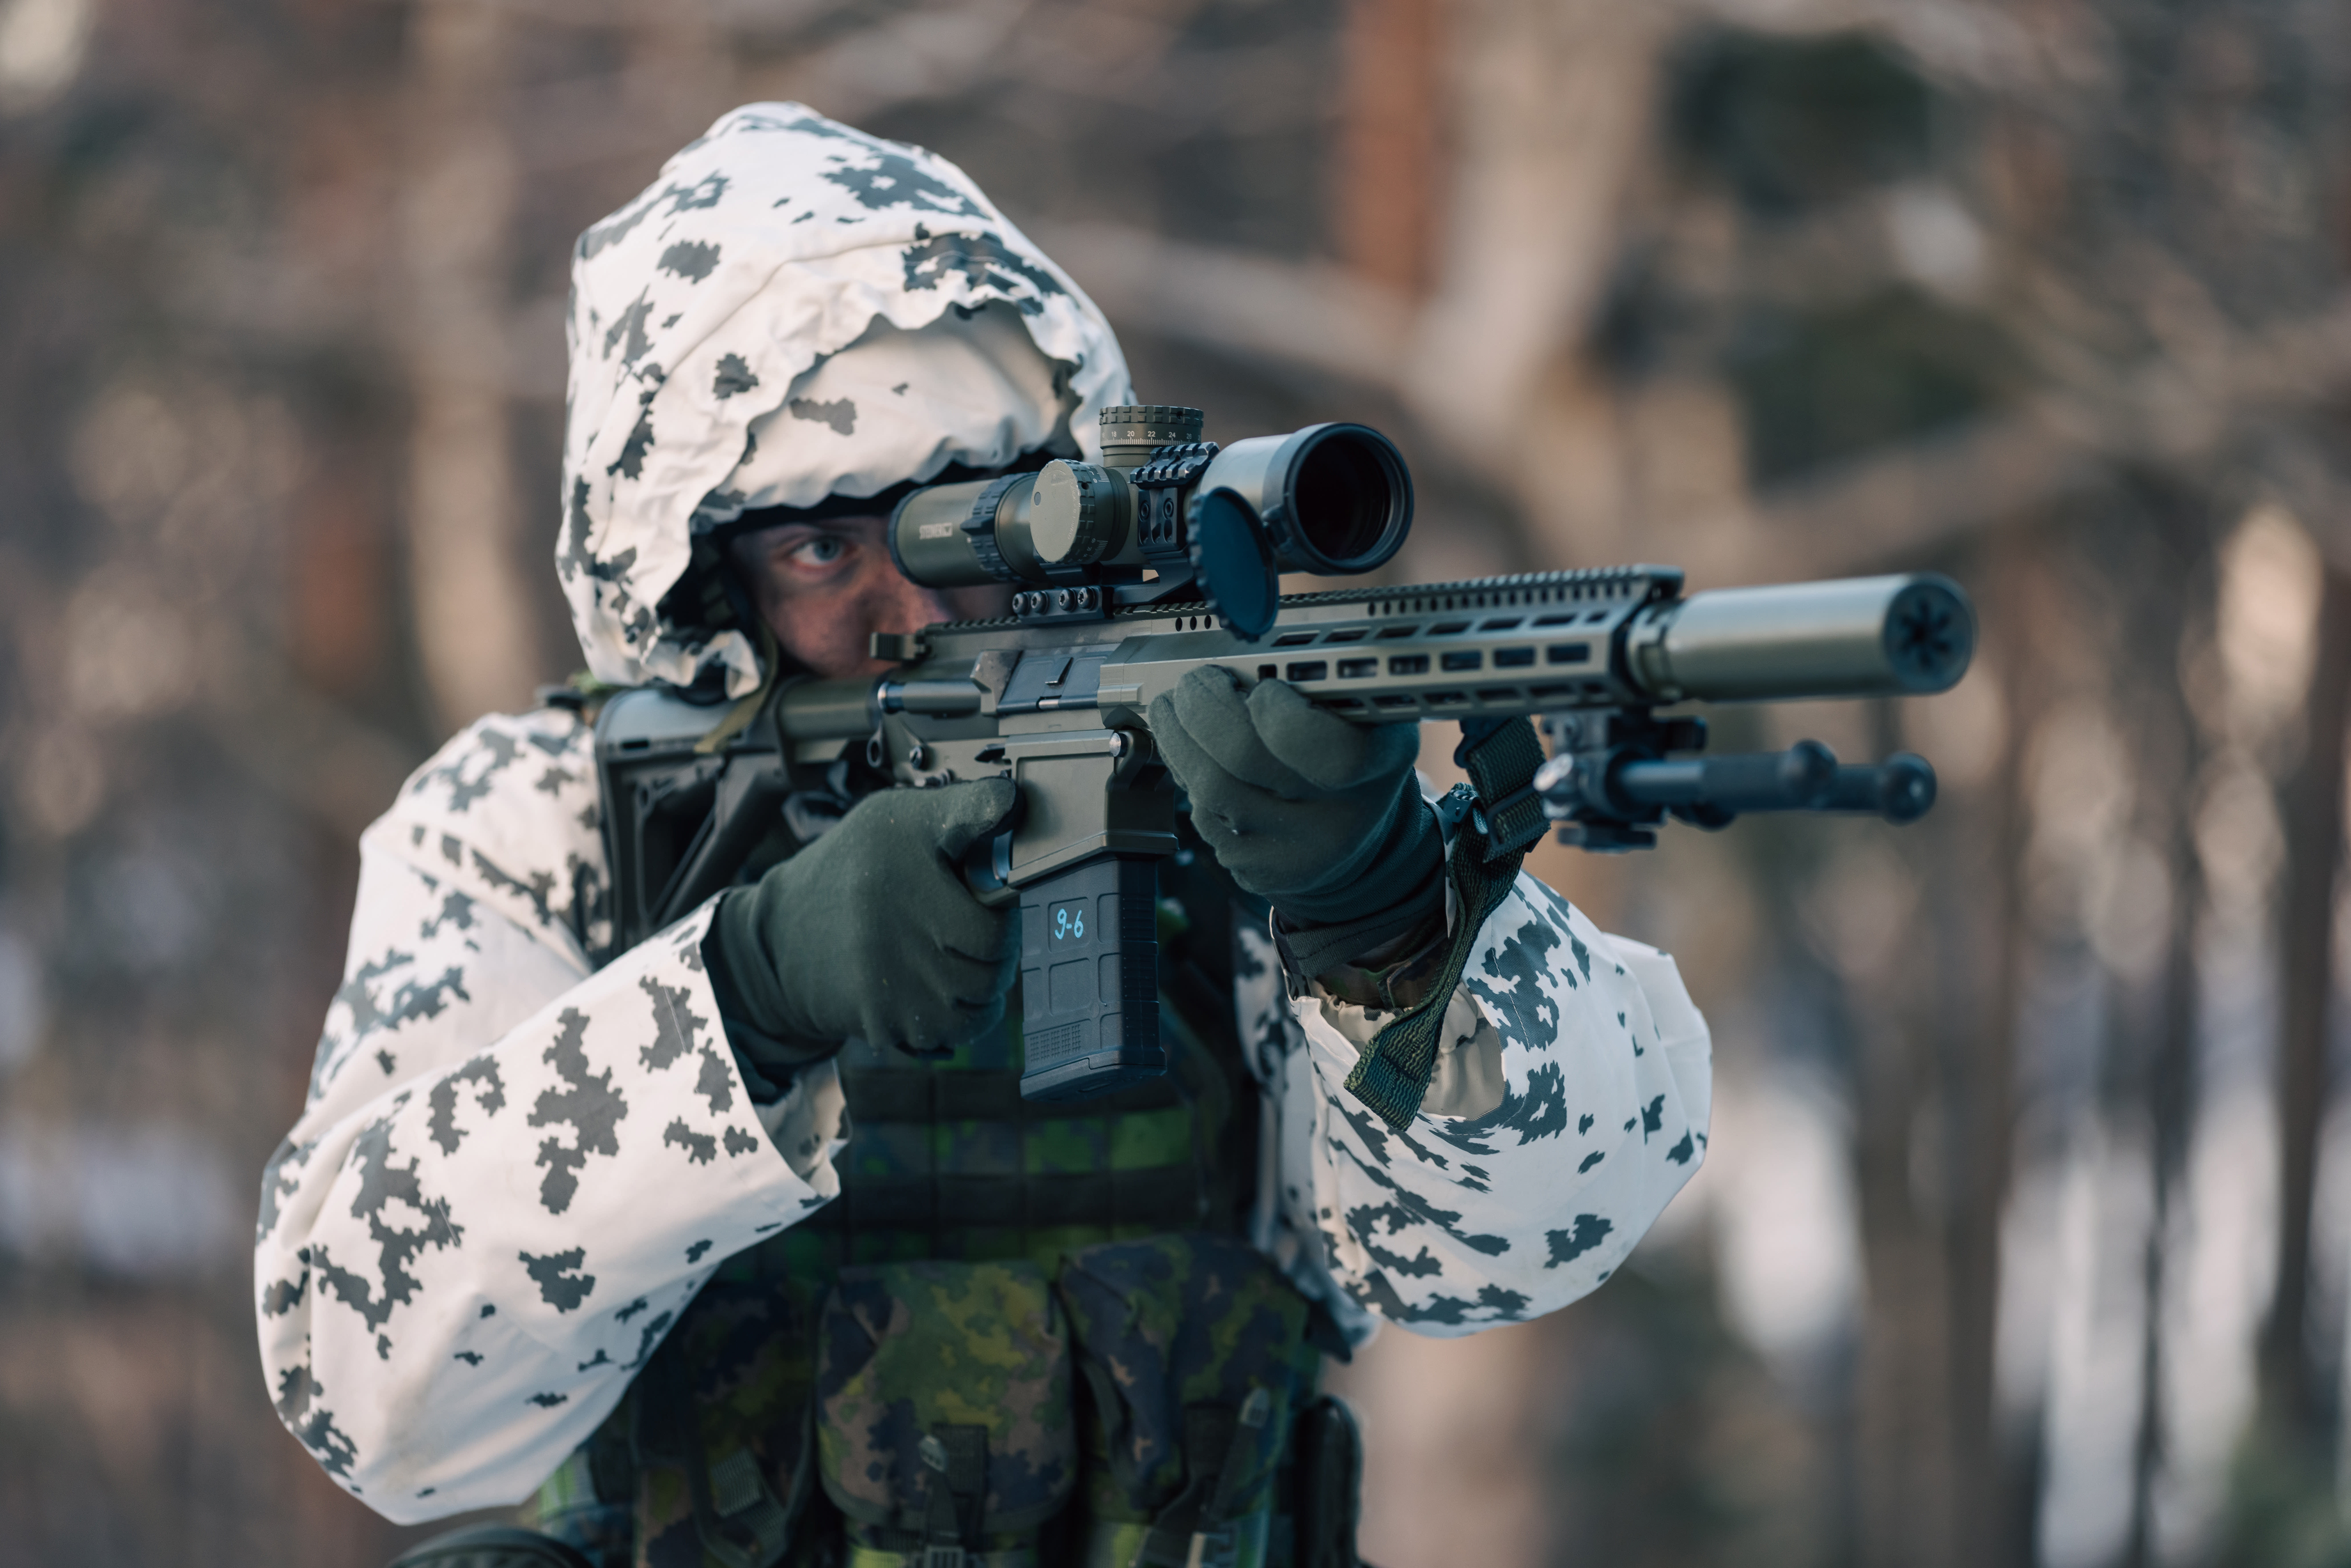 Finland and Sweden jointly acquire firearms from the Finnish company Sako